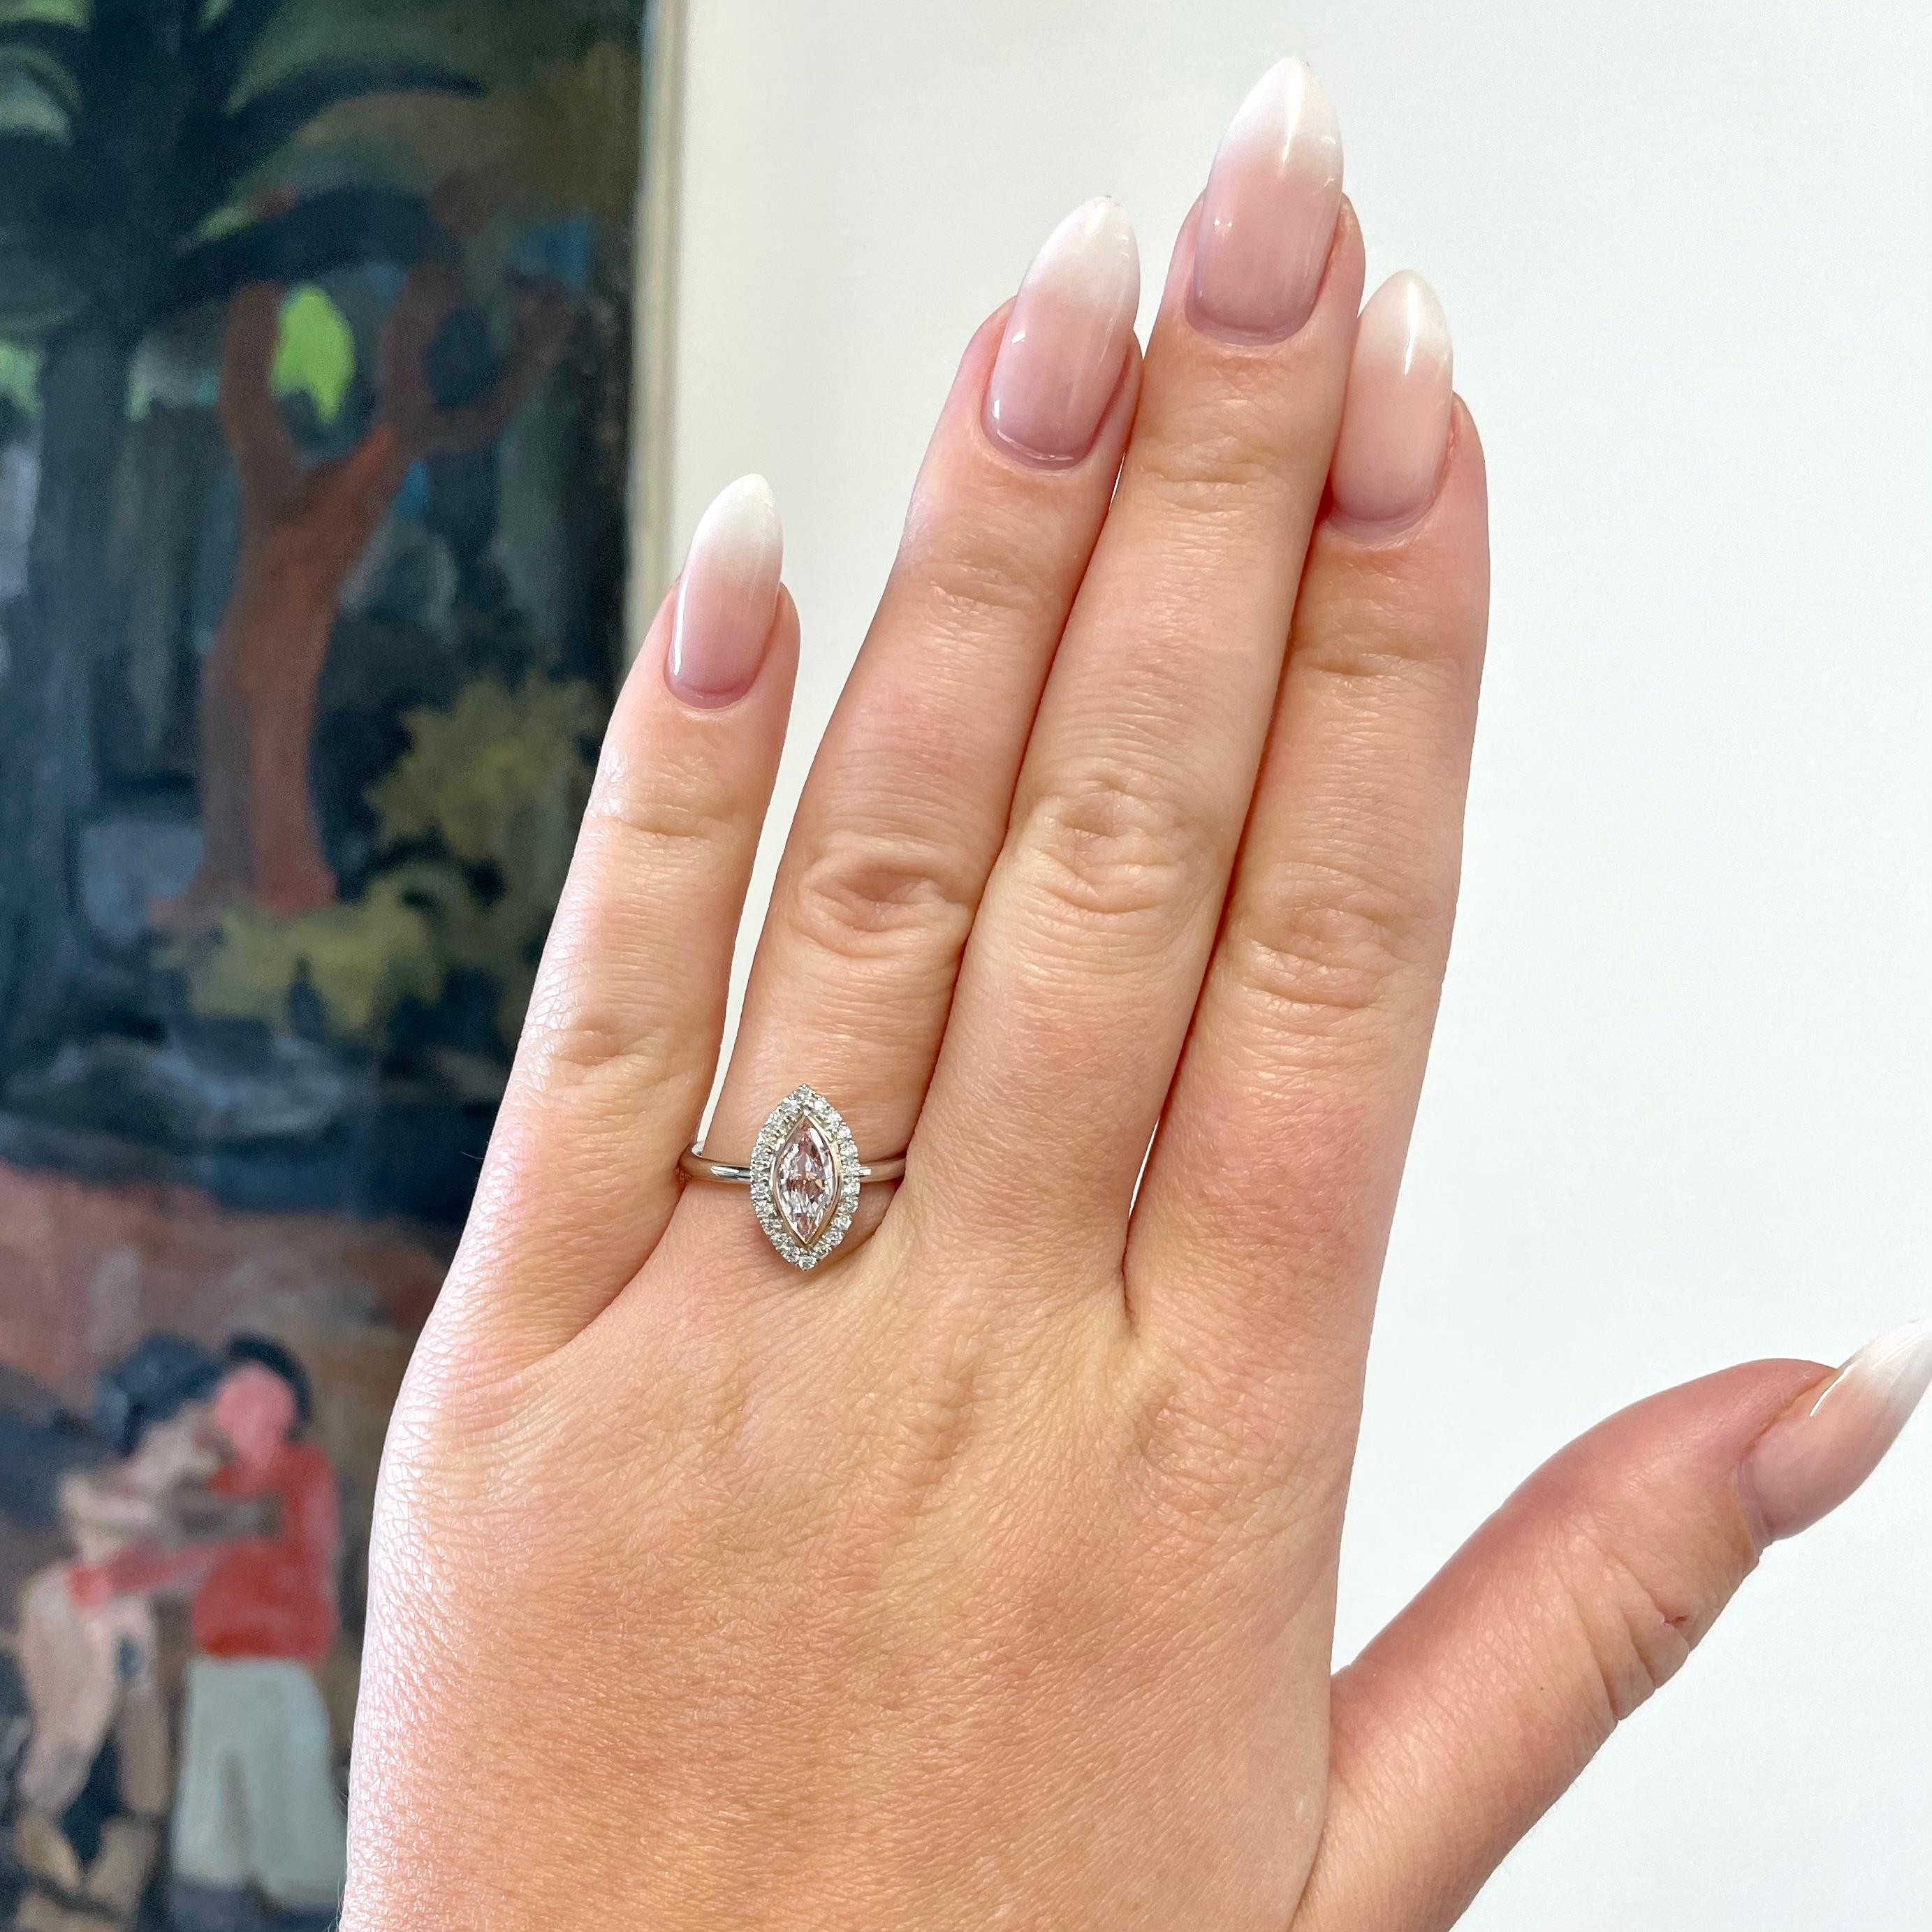 If you are looking for an engagement ring full of character, consider this striking Light Pink Marquise Cut Diamond Platinum Halo Solitaire Engagement Ring. Pink, the  color of true love; you will not go unnoticed wearing this stunner. 

The center